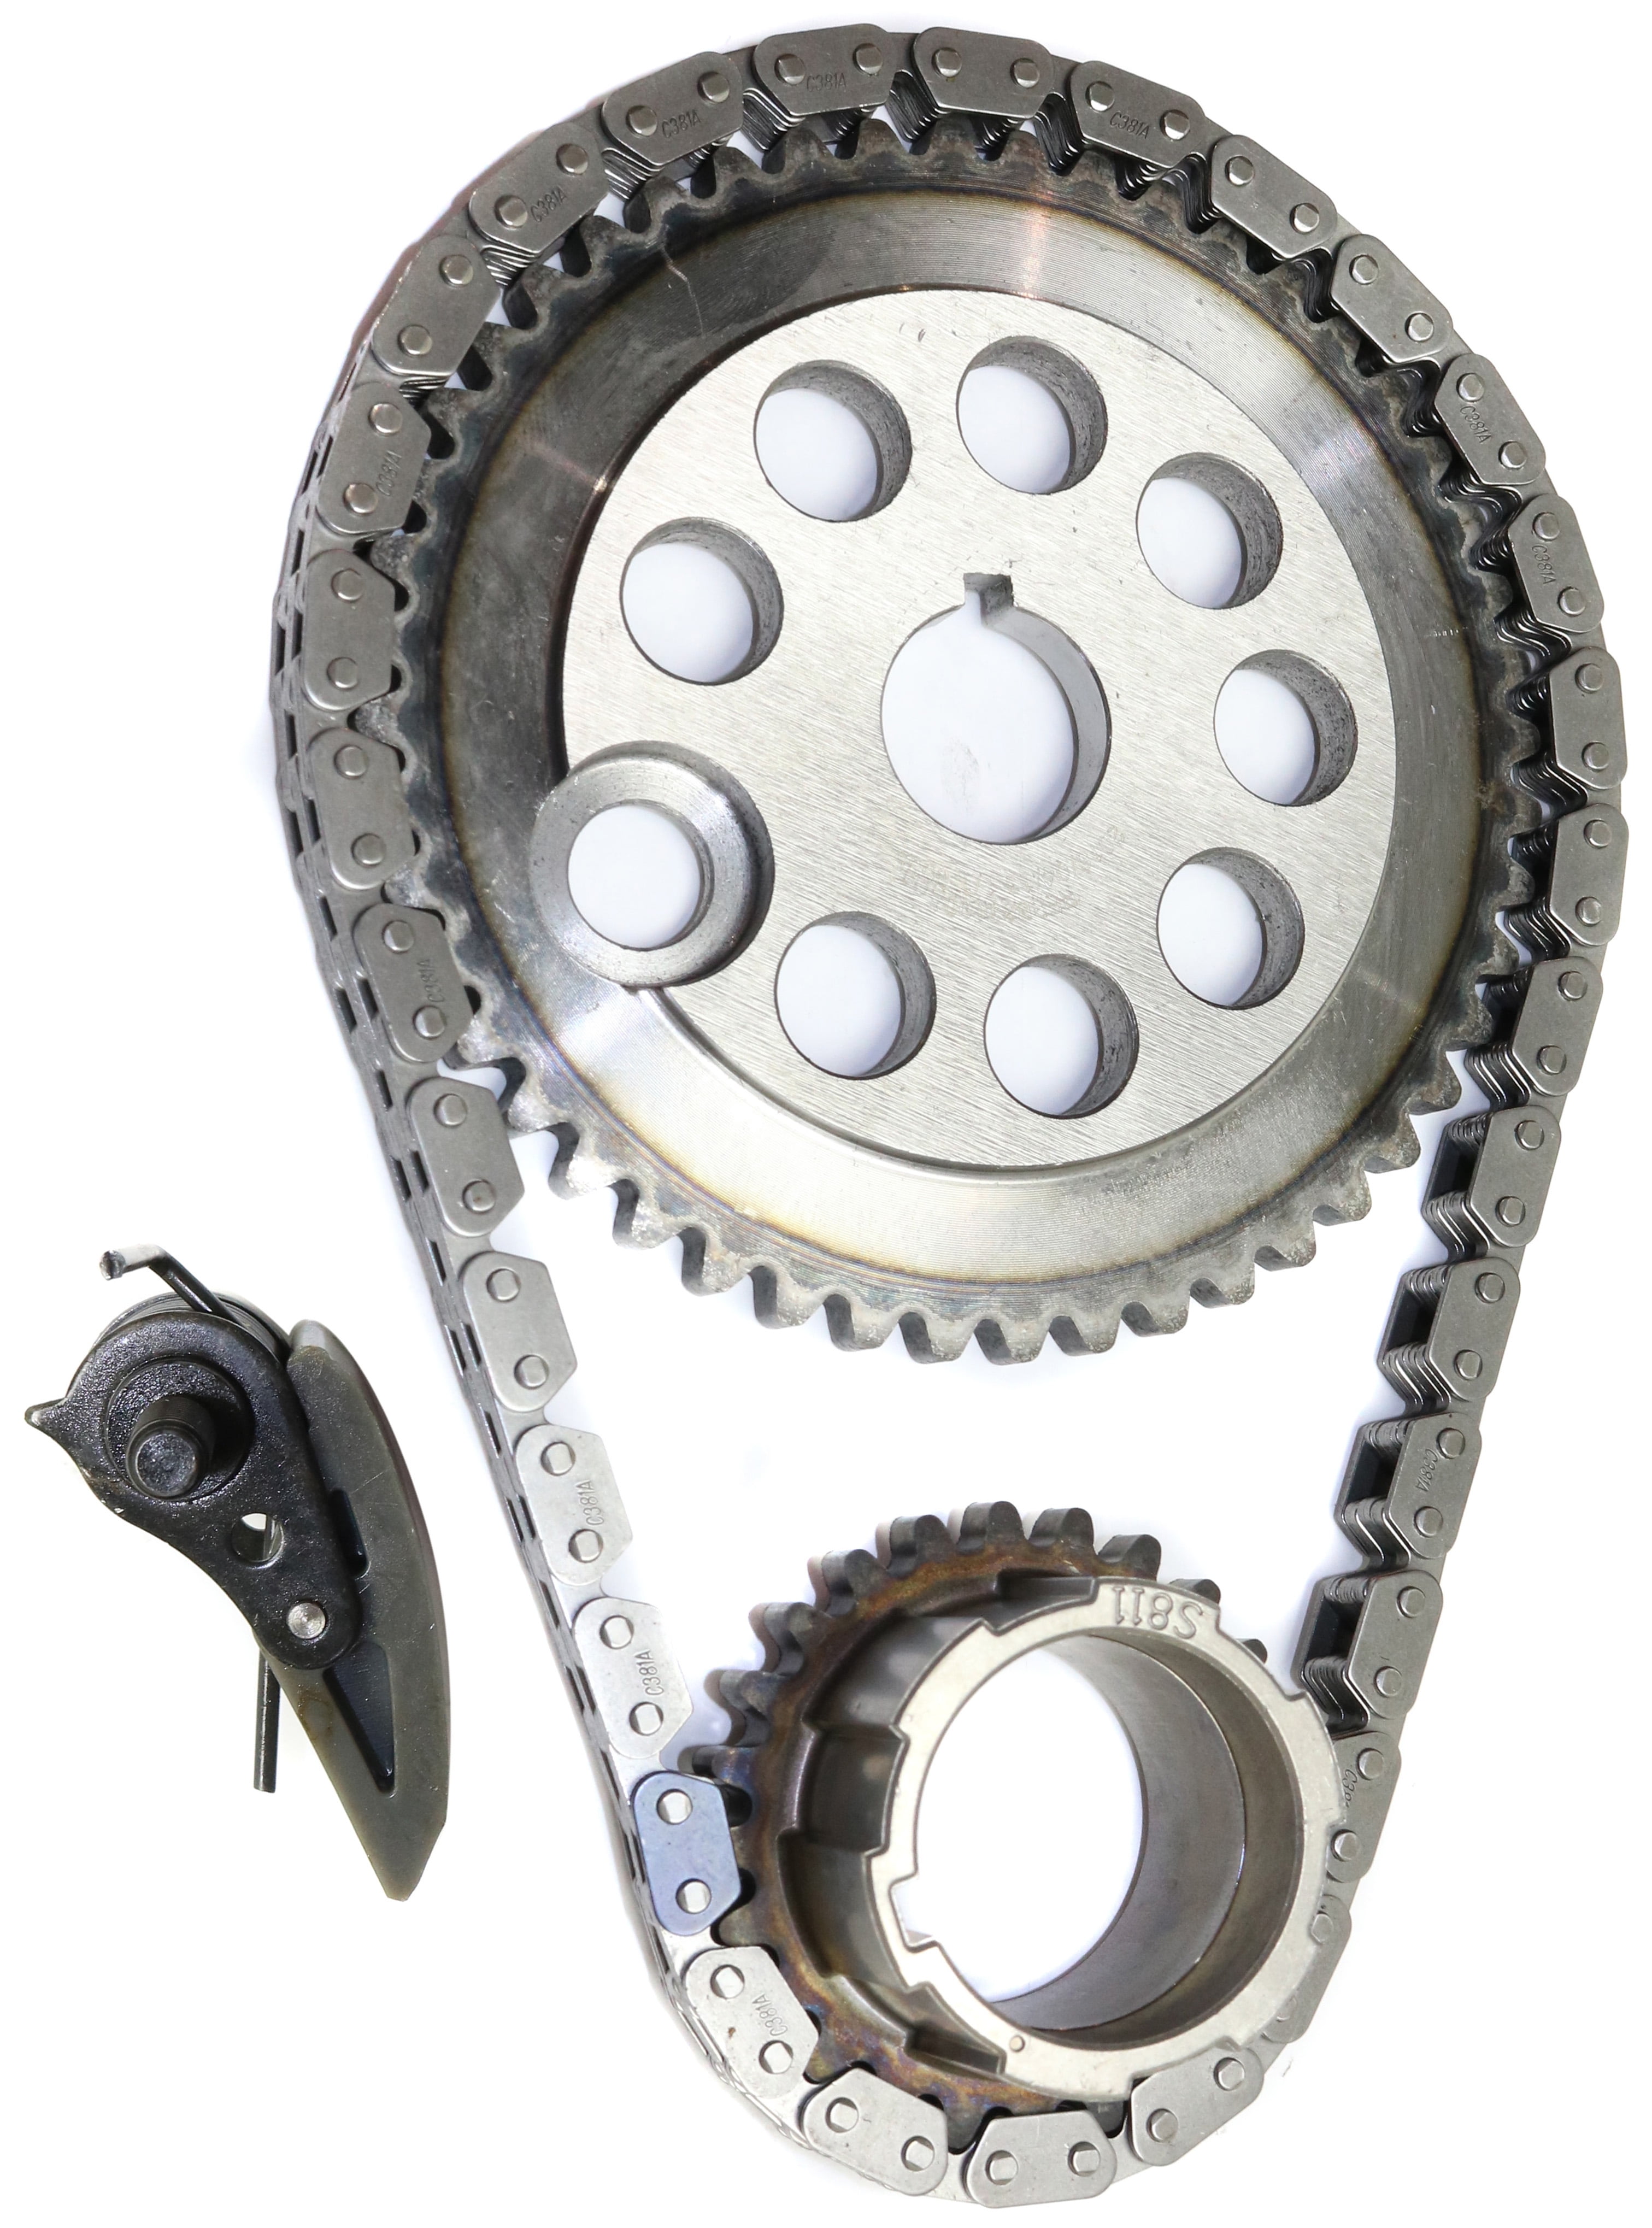 Timing Chain Kit Compatible with 1995-2005 Buick LeSabre 1995-2004 Regal  6Cyl 3.8L